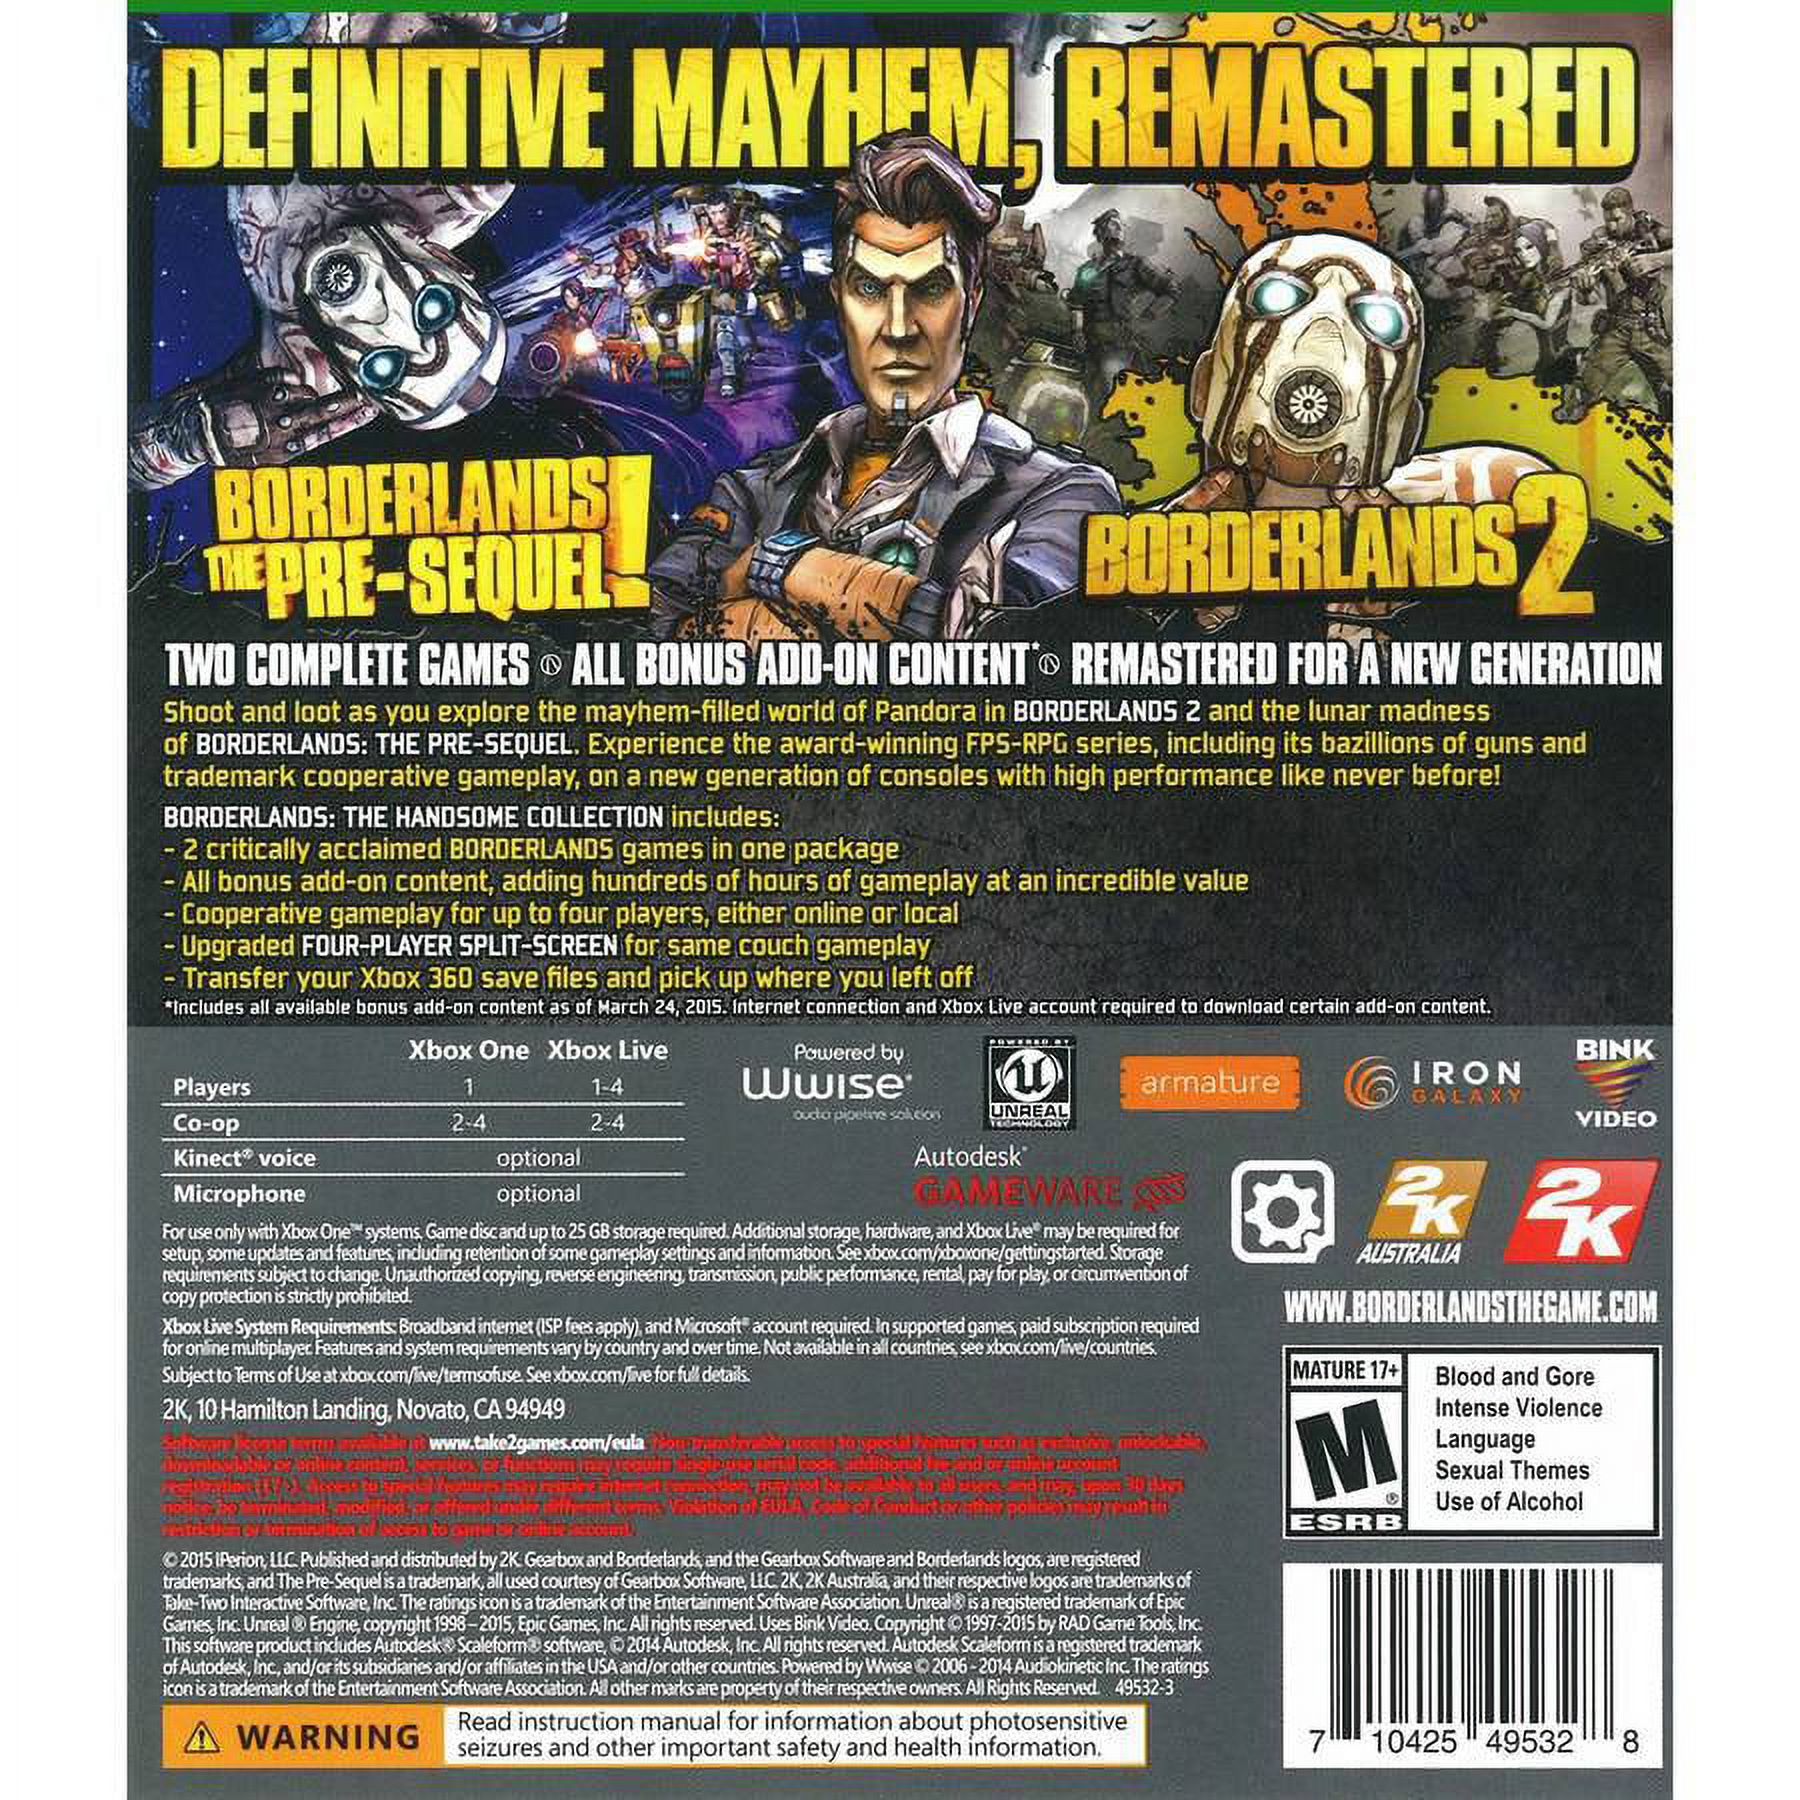 Borderlands: The Handsome Collection (Pre-Owned), 2K, Xbox One, 886162546804 - image 2 of 5